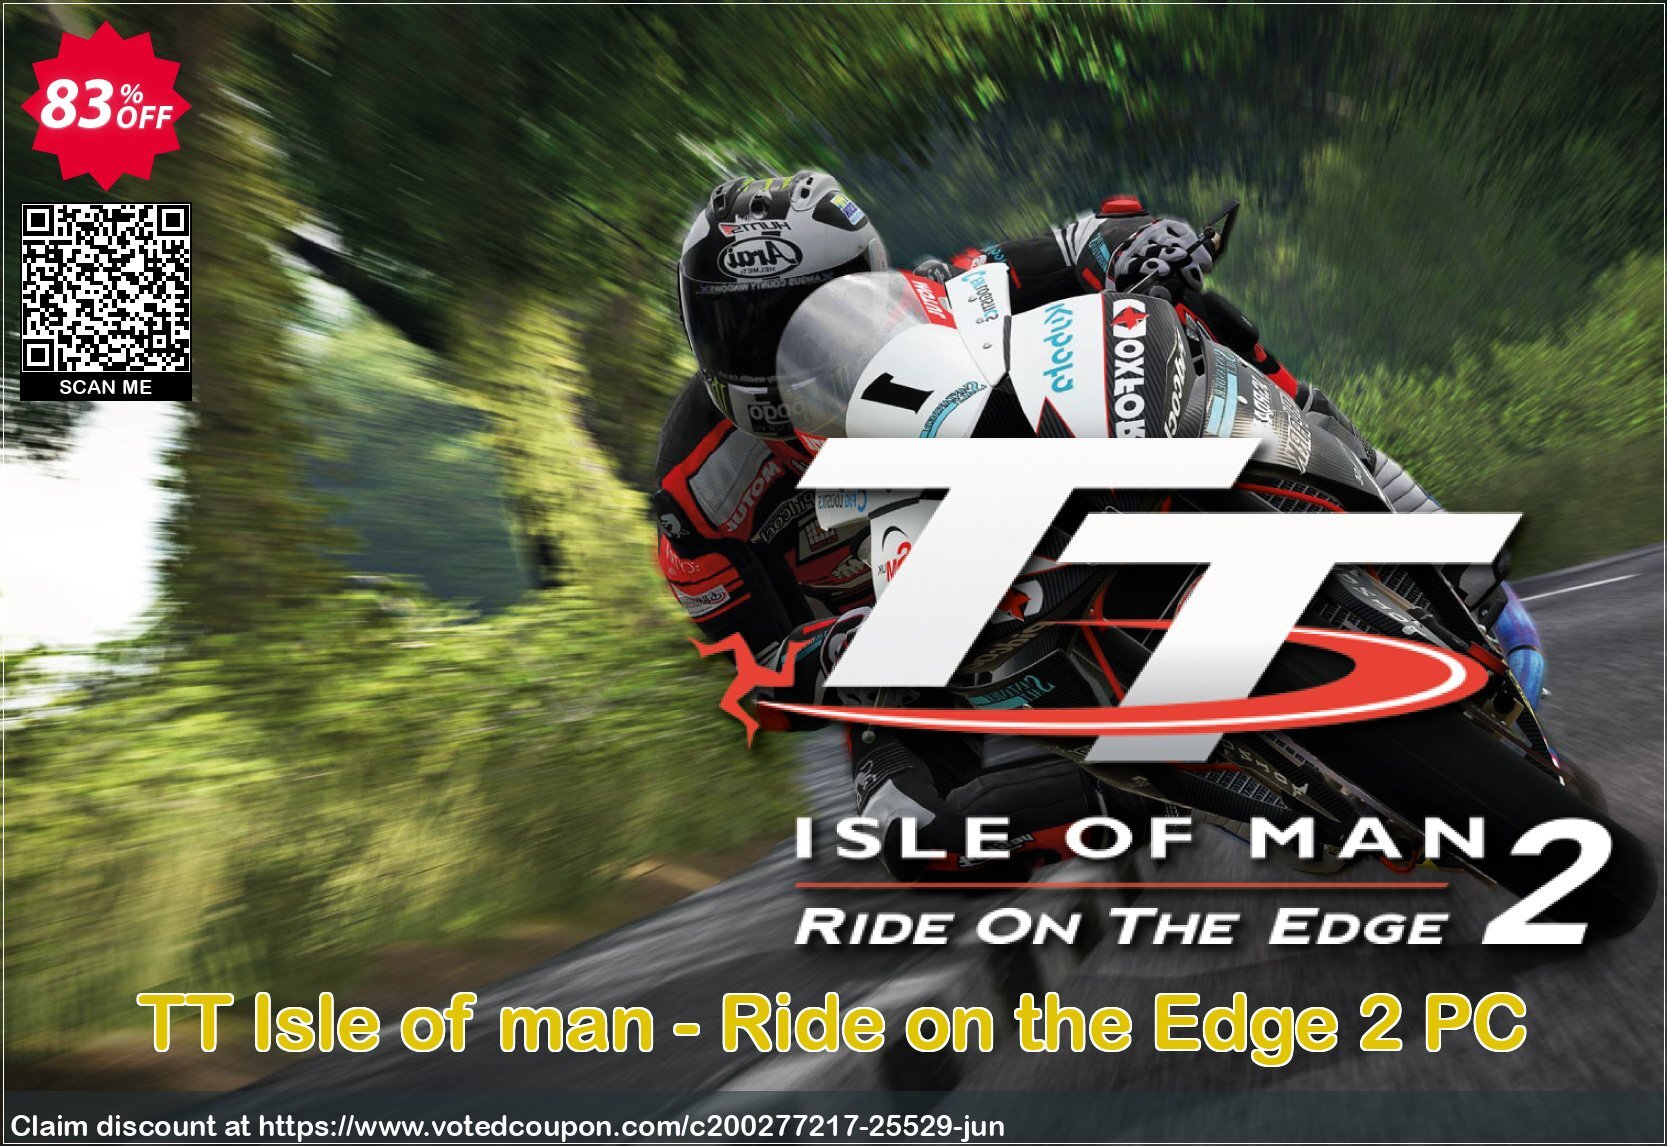 TT Isle of man - Ride on the Edge 2 PC Coupon, discount TT Isle of man - Ride on the Edge 2 PC Deal. Promotion: TT Isle of man - Ride on the Edge 2 PC Exclusive offer 